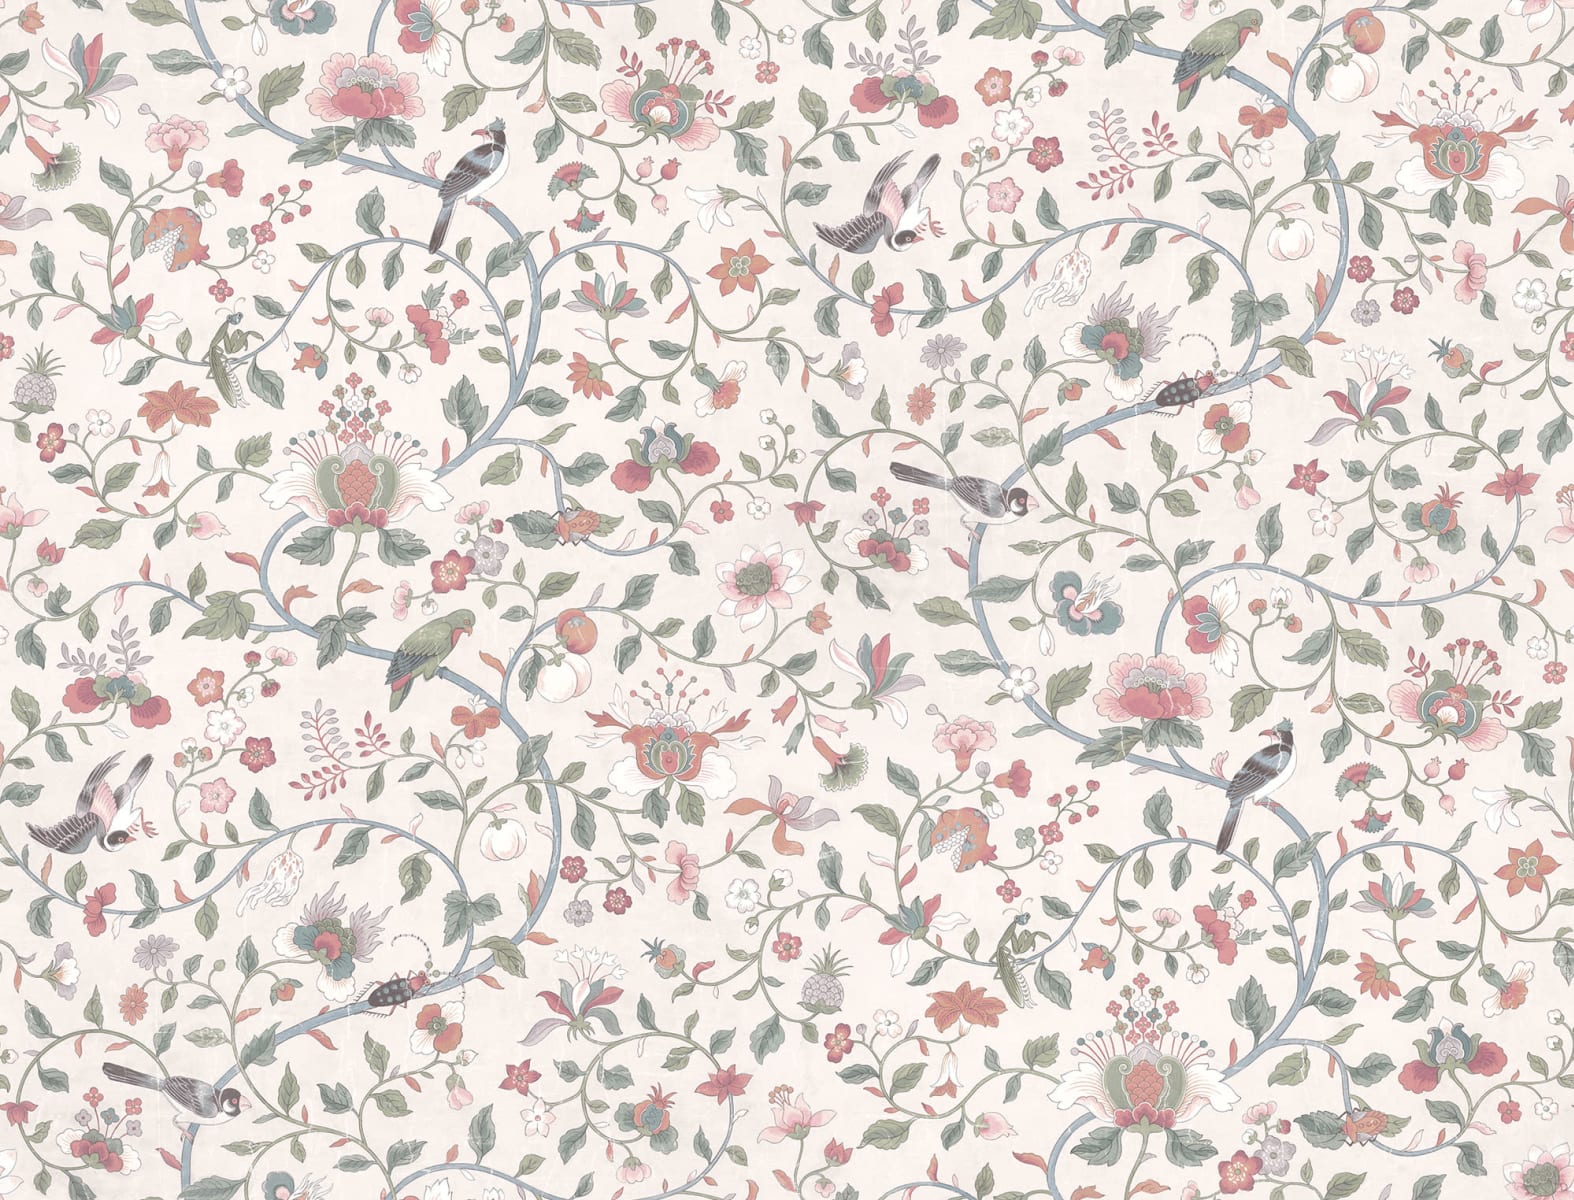 Hedda wallpaper has an exquisitely detailed older hand-painted original, which, with its multifaceted colors, can match many different interiors. 